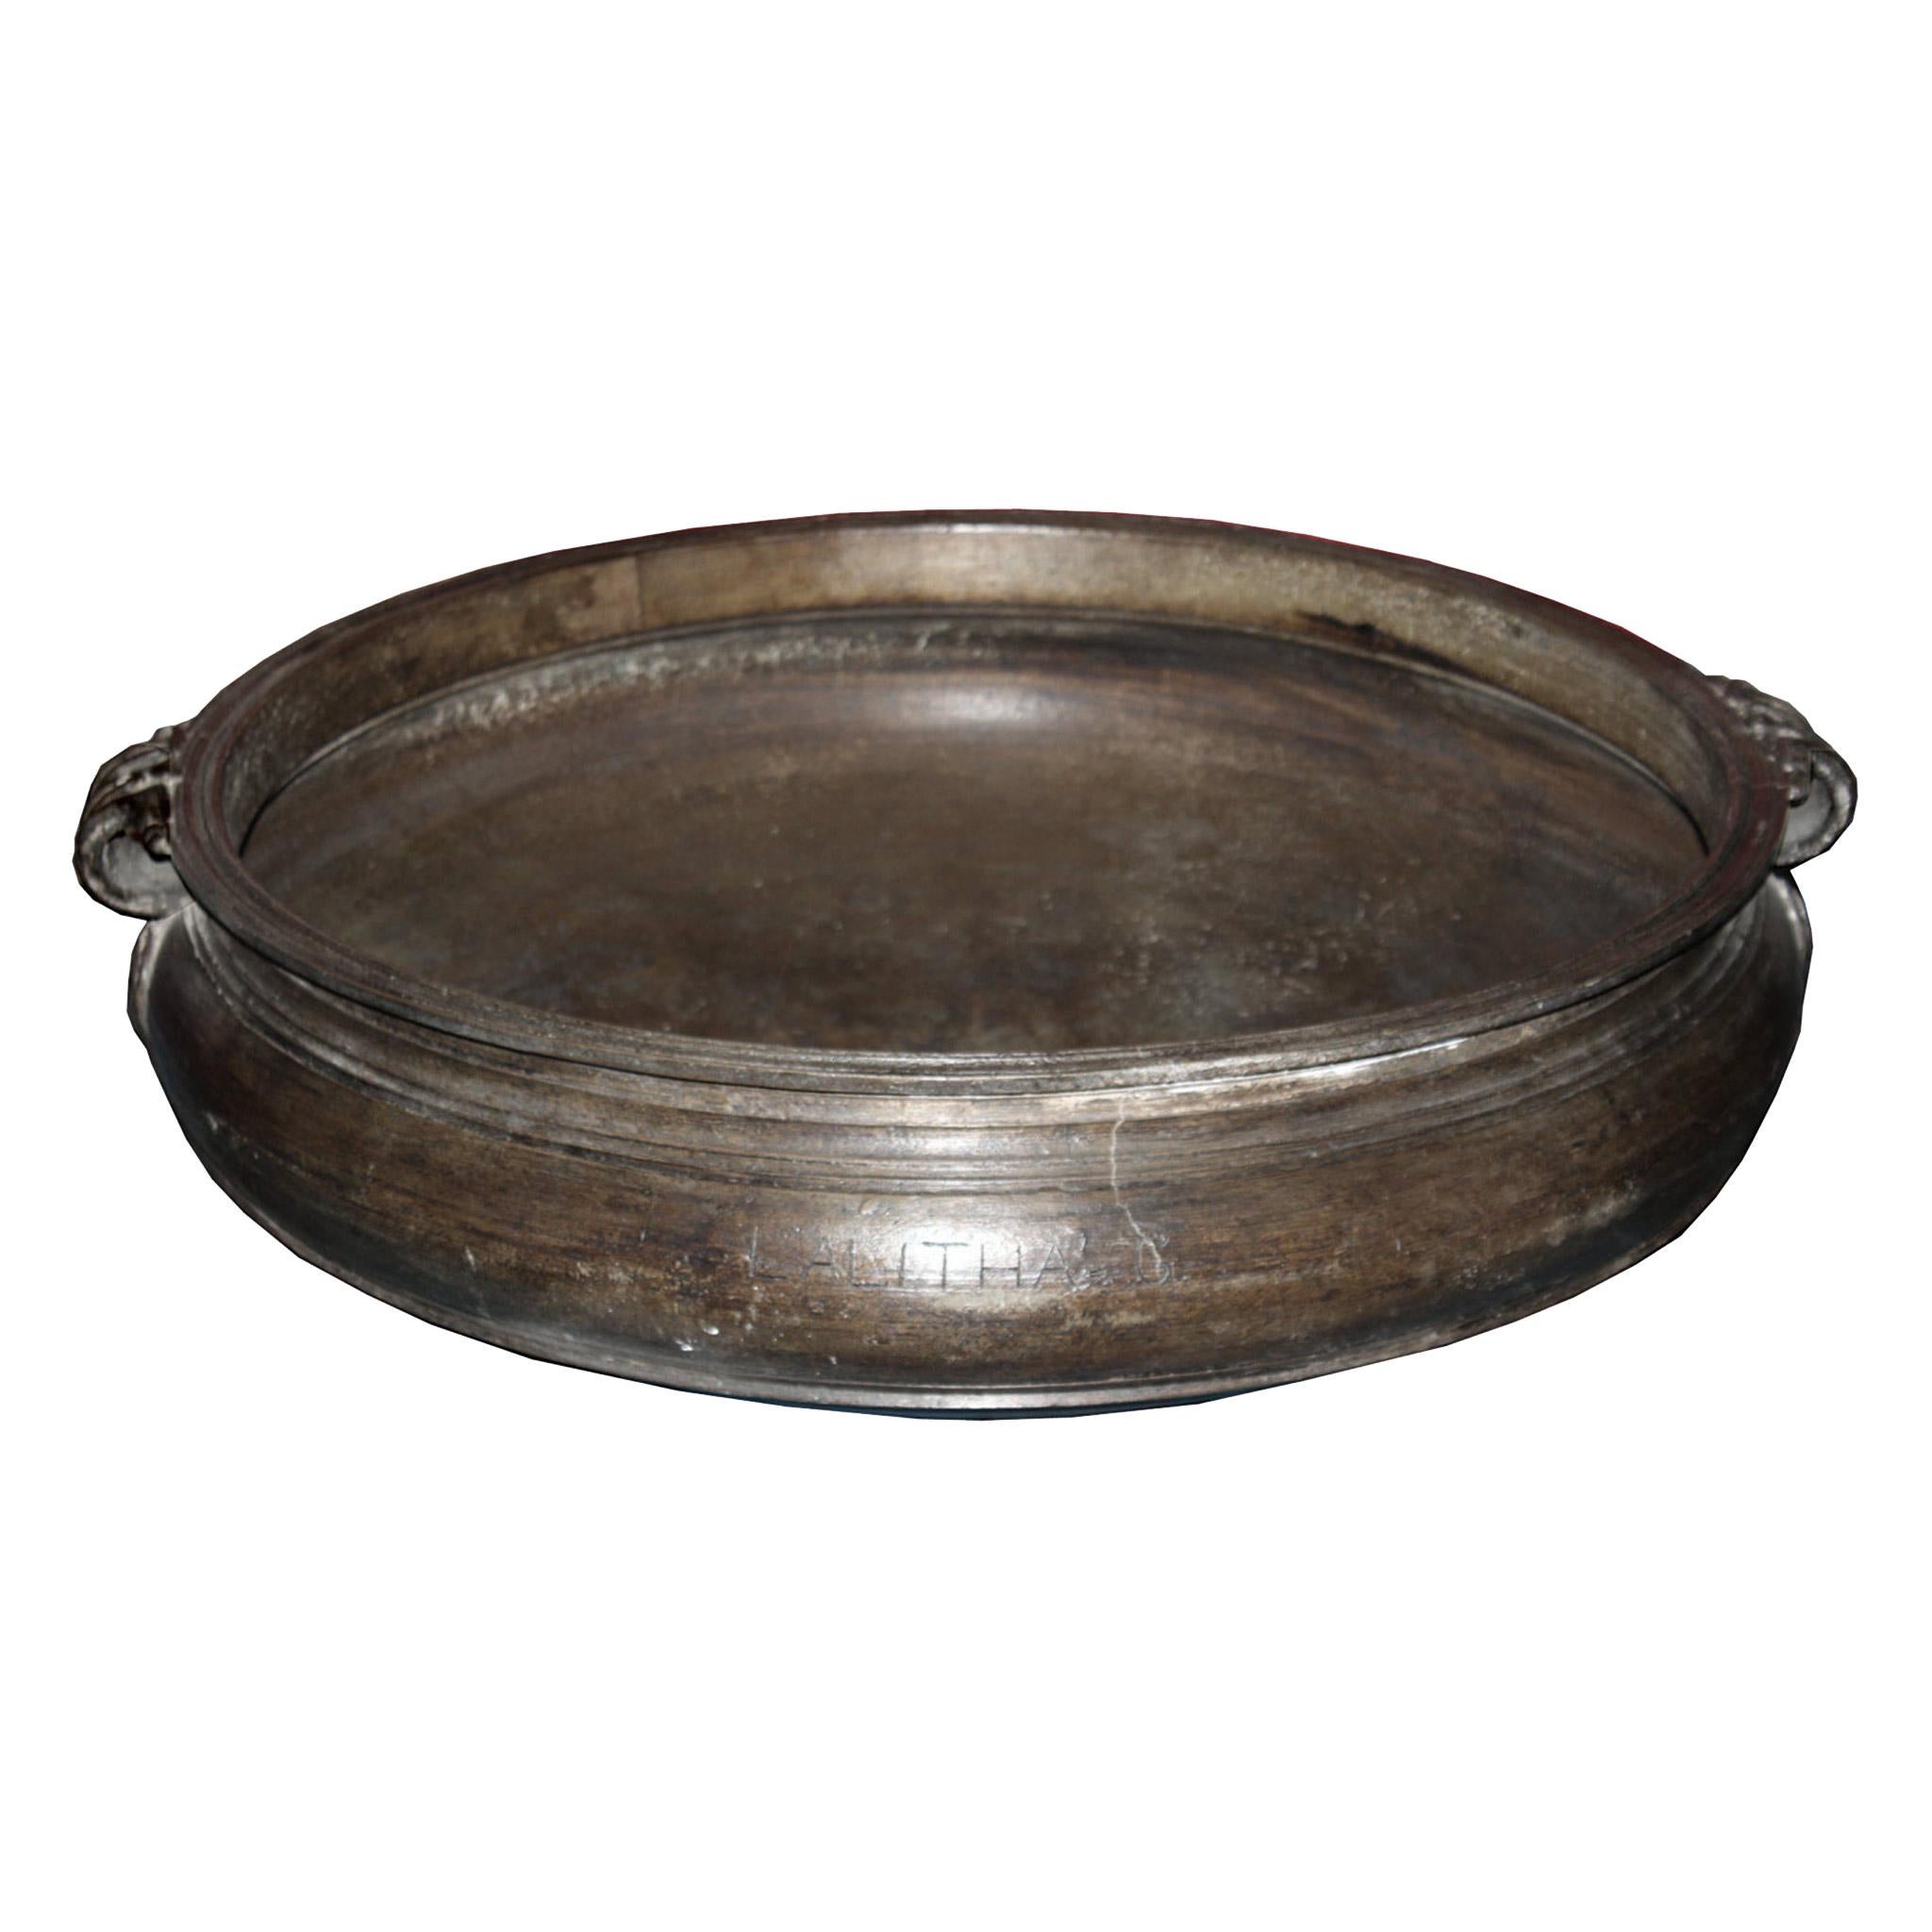 19th C bronze urli (cooking vessel) from Southern Indian used for cooking in festivals and wedding ceremonies. Urli can be used as an outdoor fire pit, a dramatic centerpiece filled with water and rose petals or as a container for orchids or plants.